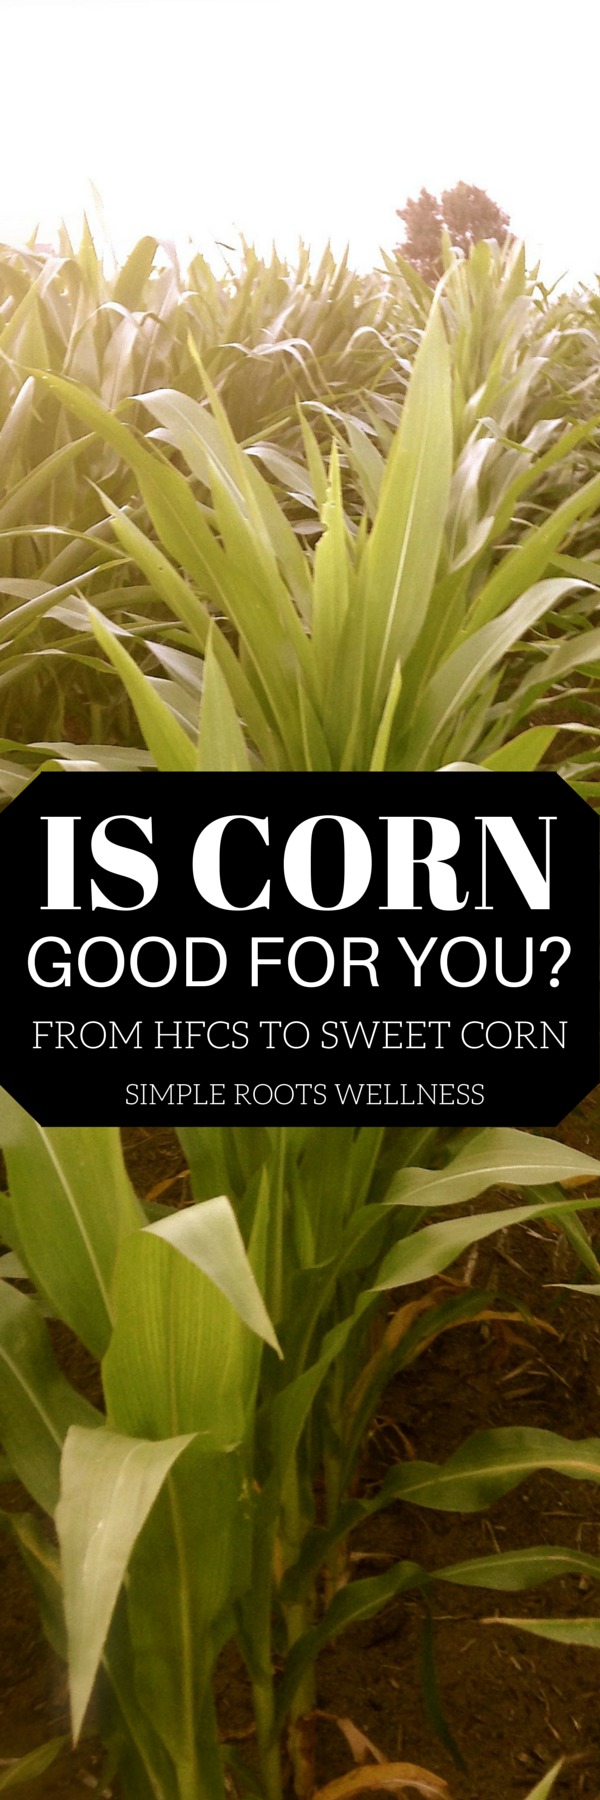 Is Corn Good For You? | simplerootswellness.com